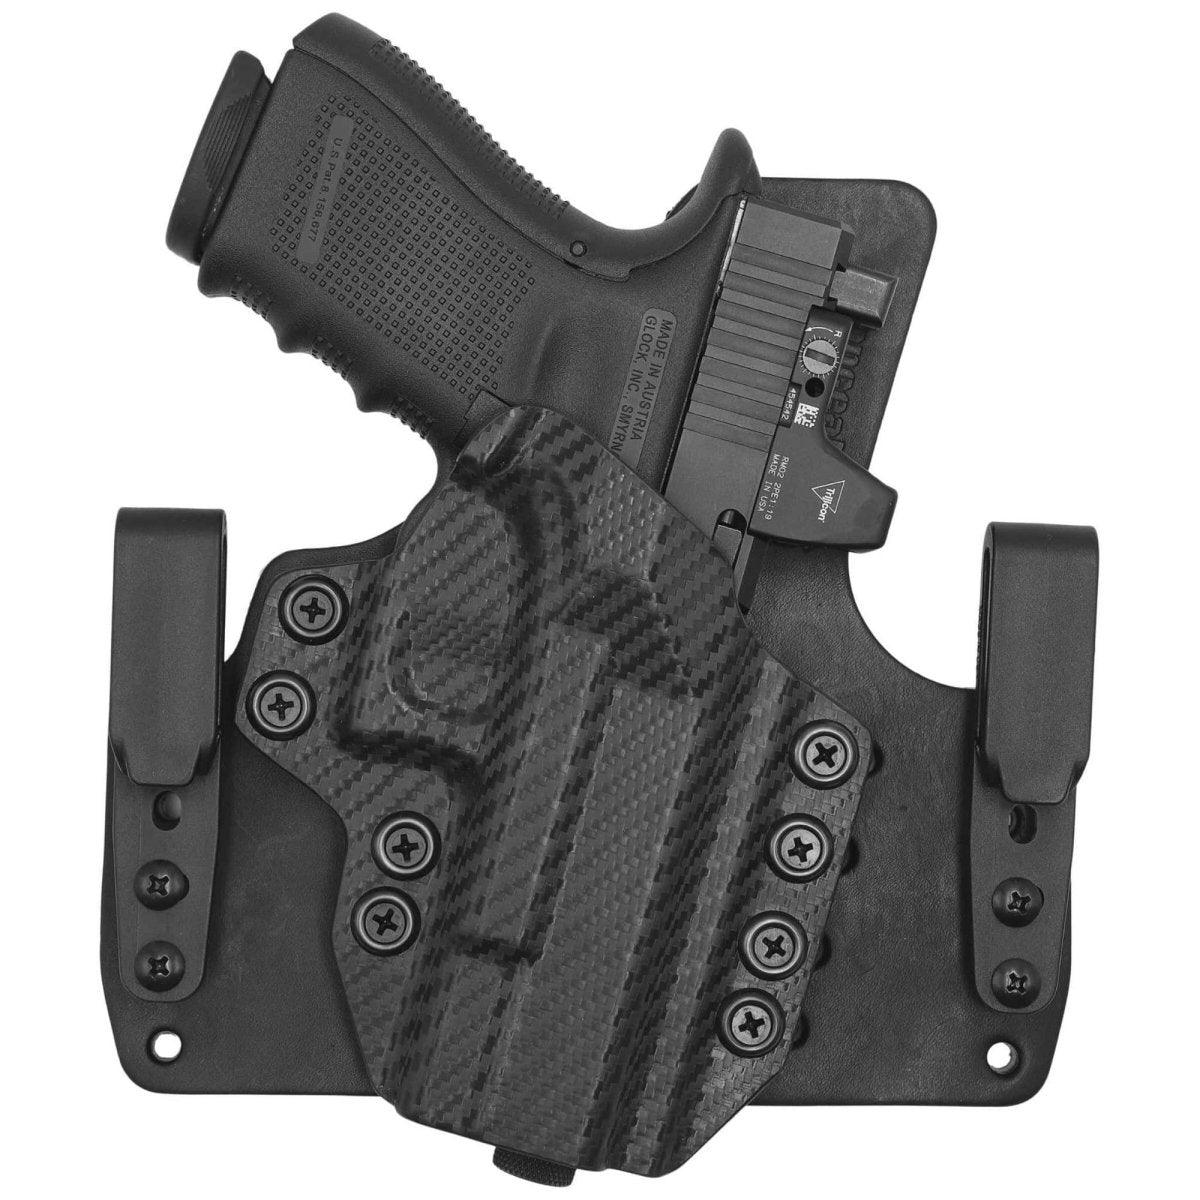 Leather Hybrid Holsters